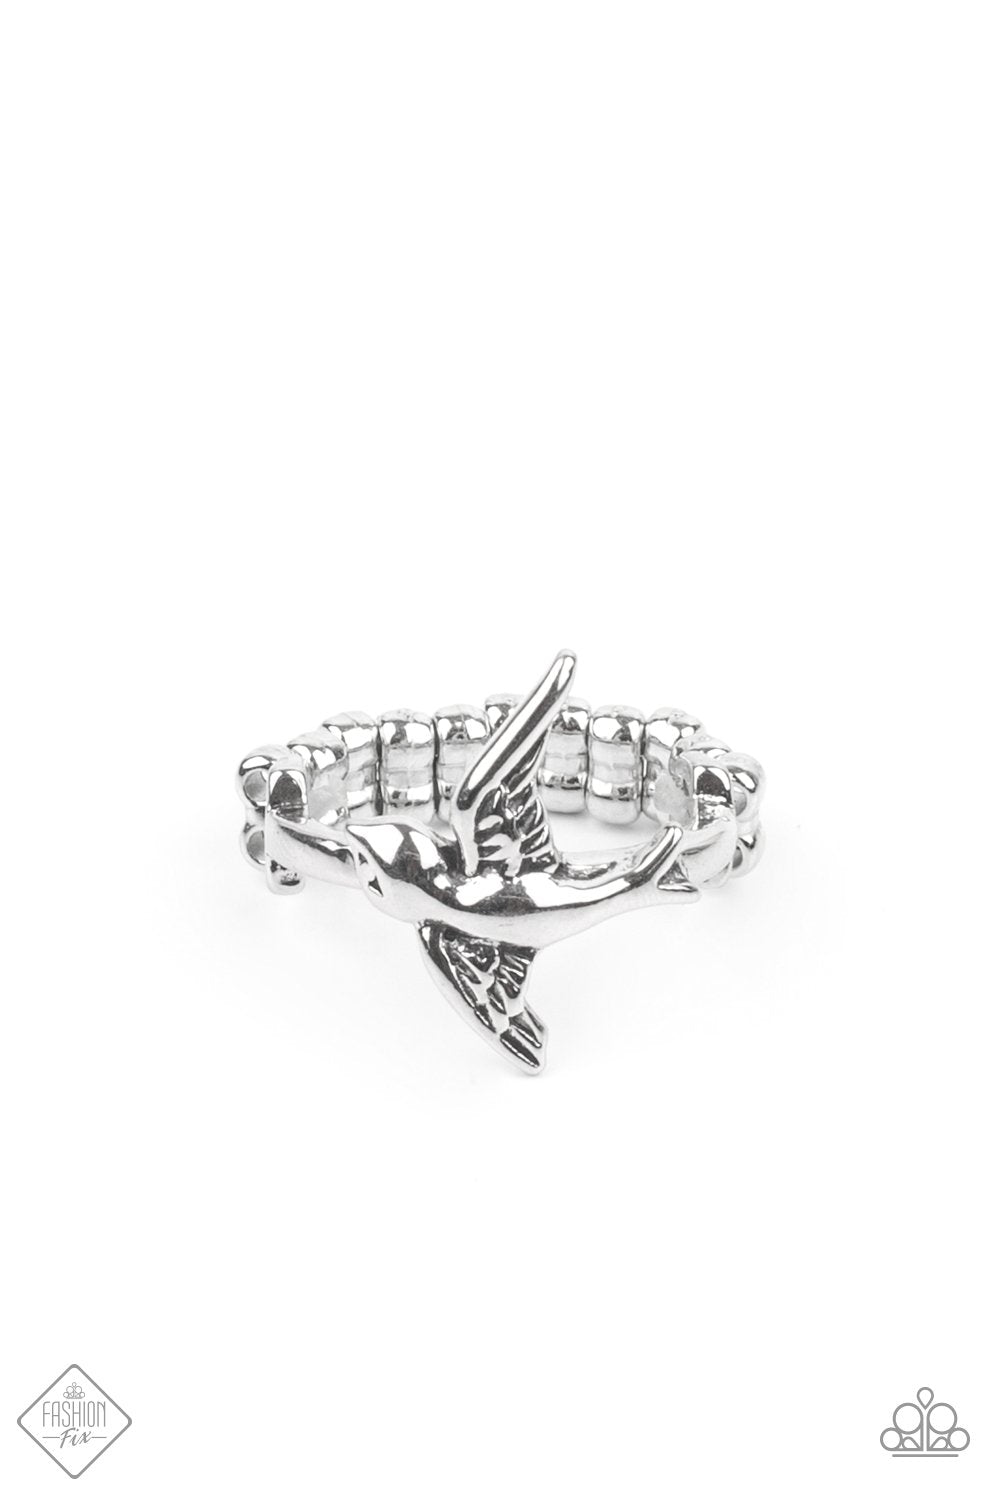 Totally TWEET-terpated Silver Bird Ring - Paparazzi Accessories- lightbox - CarasShop.com - $5 Jewelry by Cara Jewels